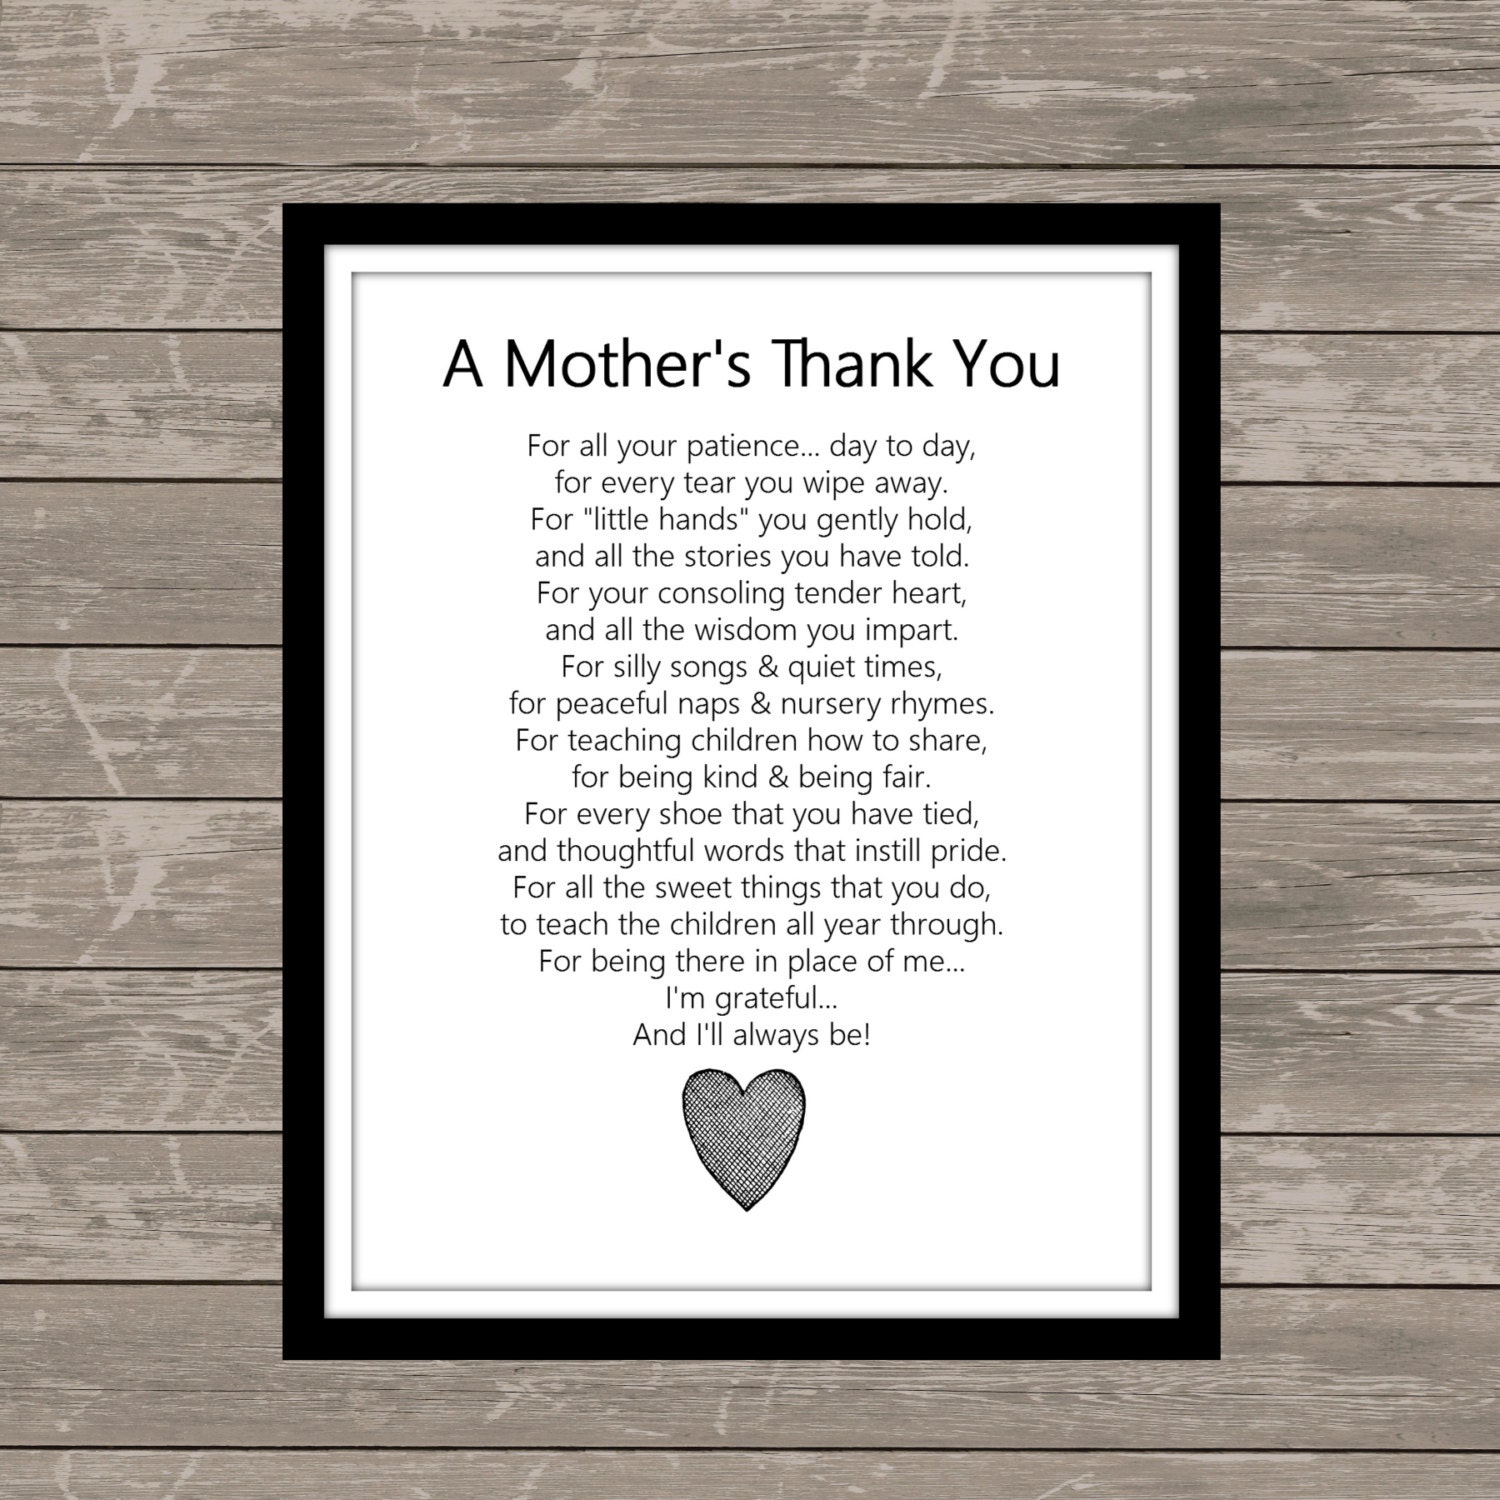 A MOTHER'S THANK YOU poem Deal of the week Next 10 who